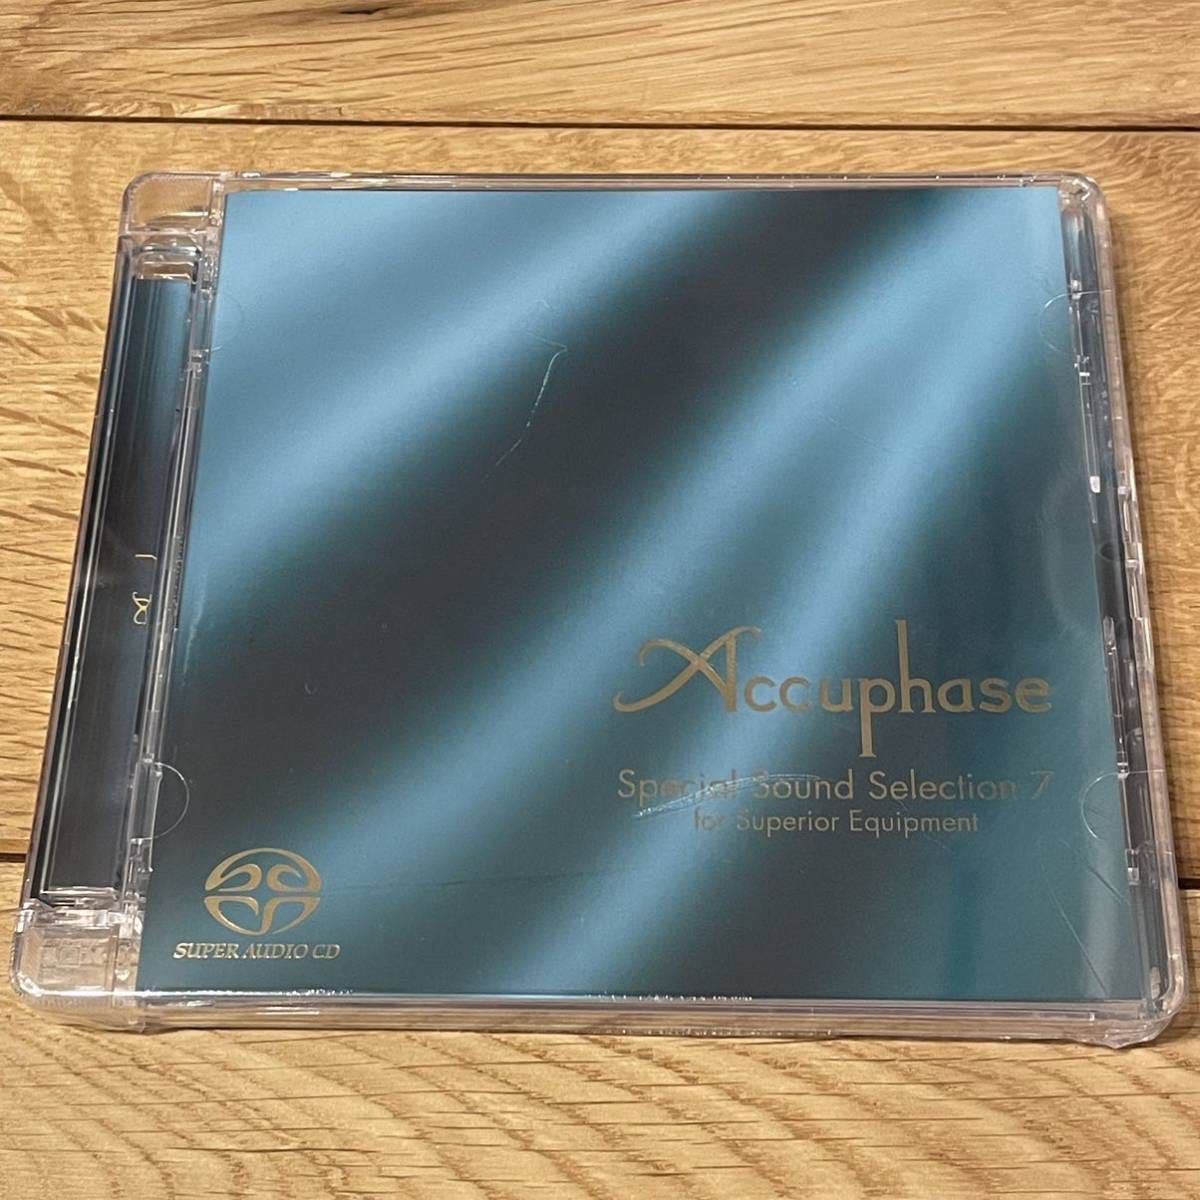 Accuphase Special Sound Selection 7 非売品 未開封 SACD_画像1